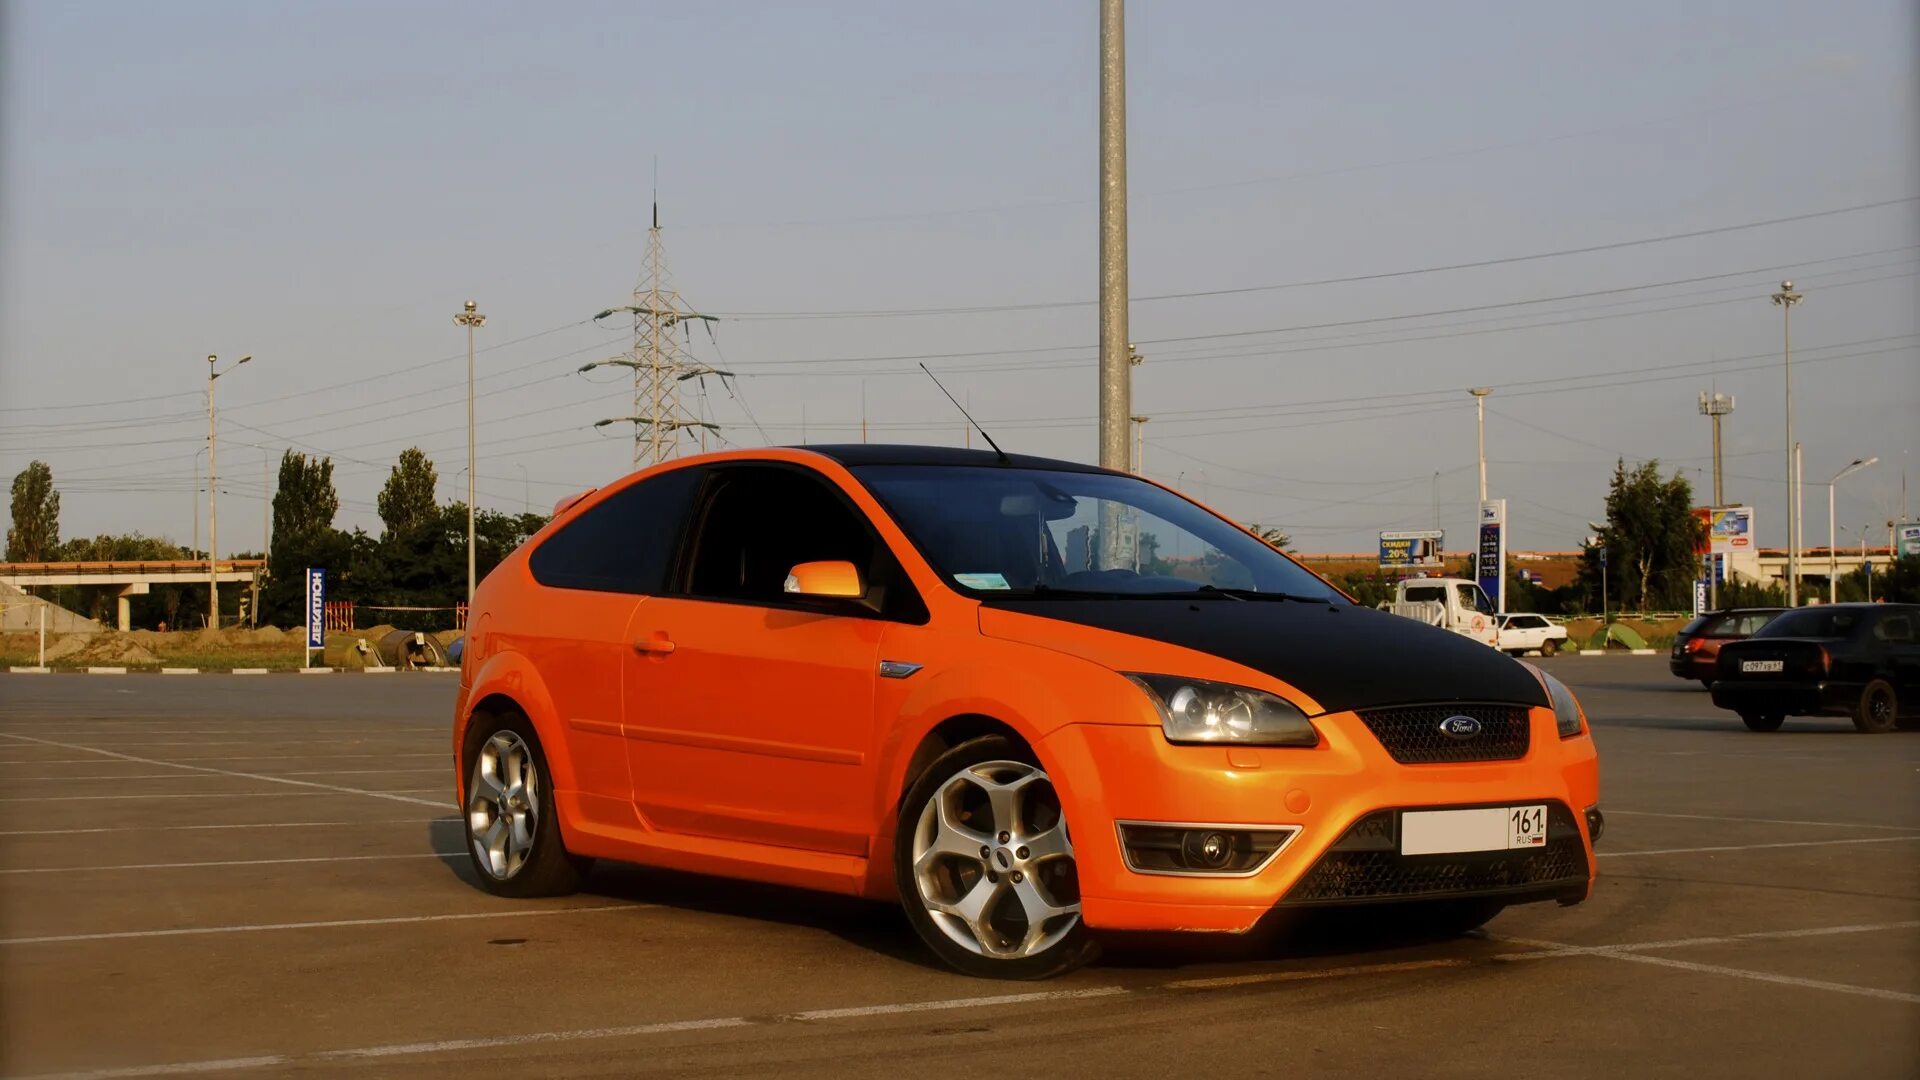 Ford Focus St 2006. Ford Focus 2 St 2006. Форд фокус ст 2006. Ford Focus 2 St 2008.